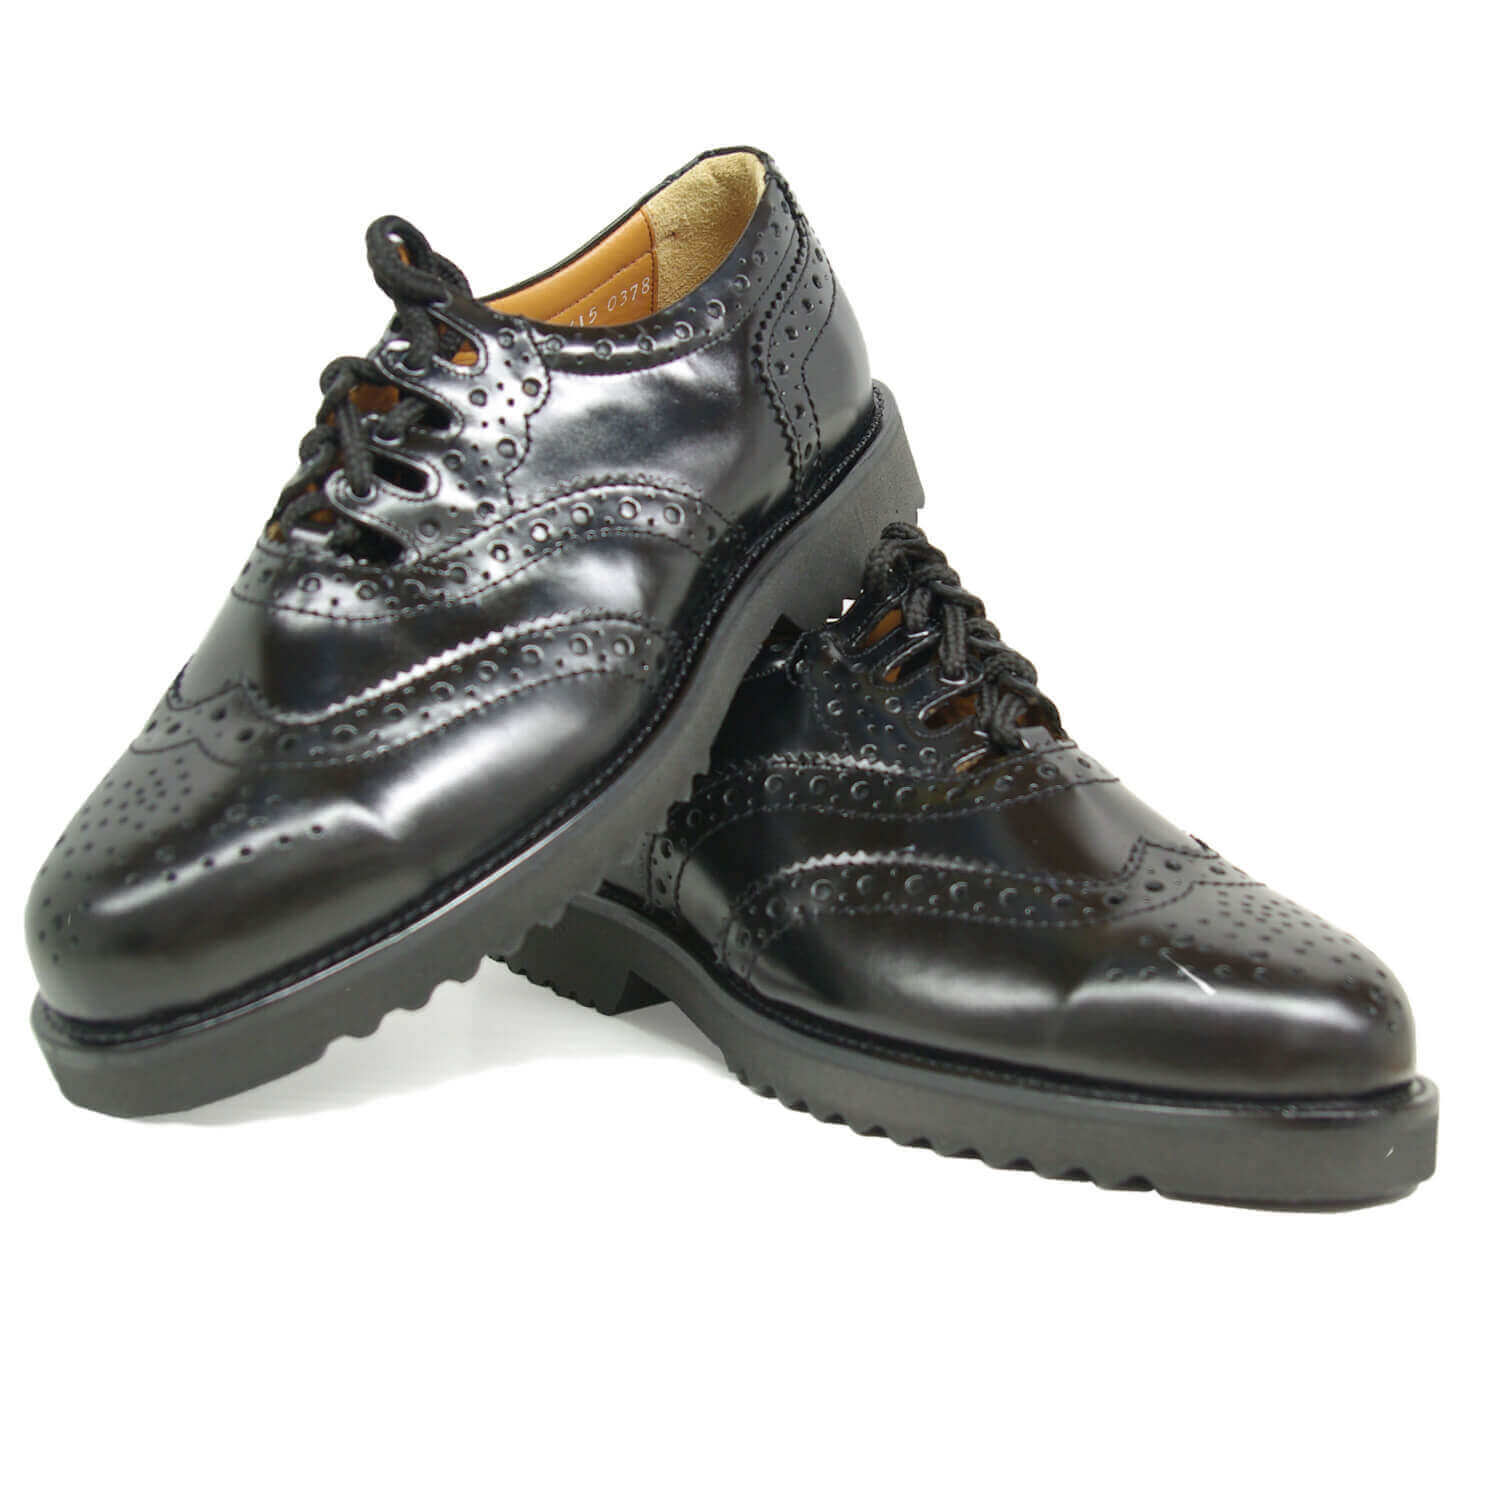 Orthotic Piper Ghillie Brogues